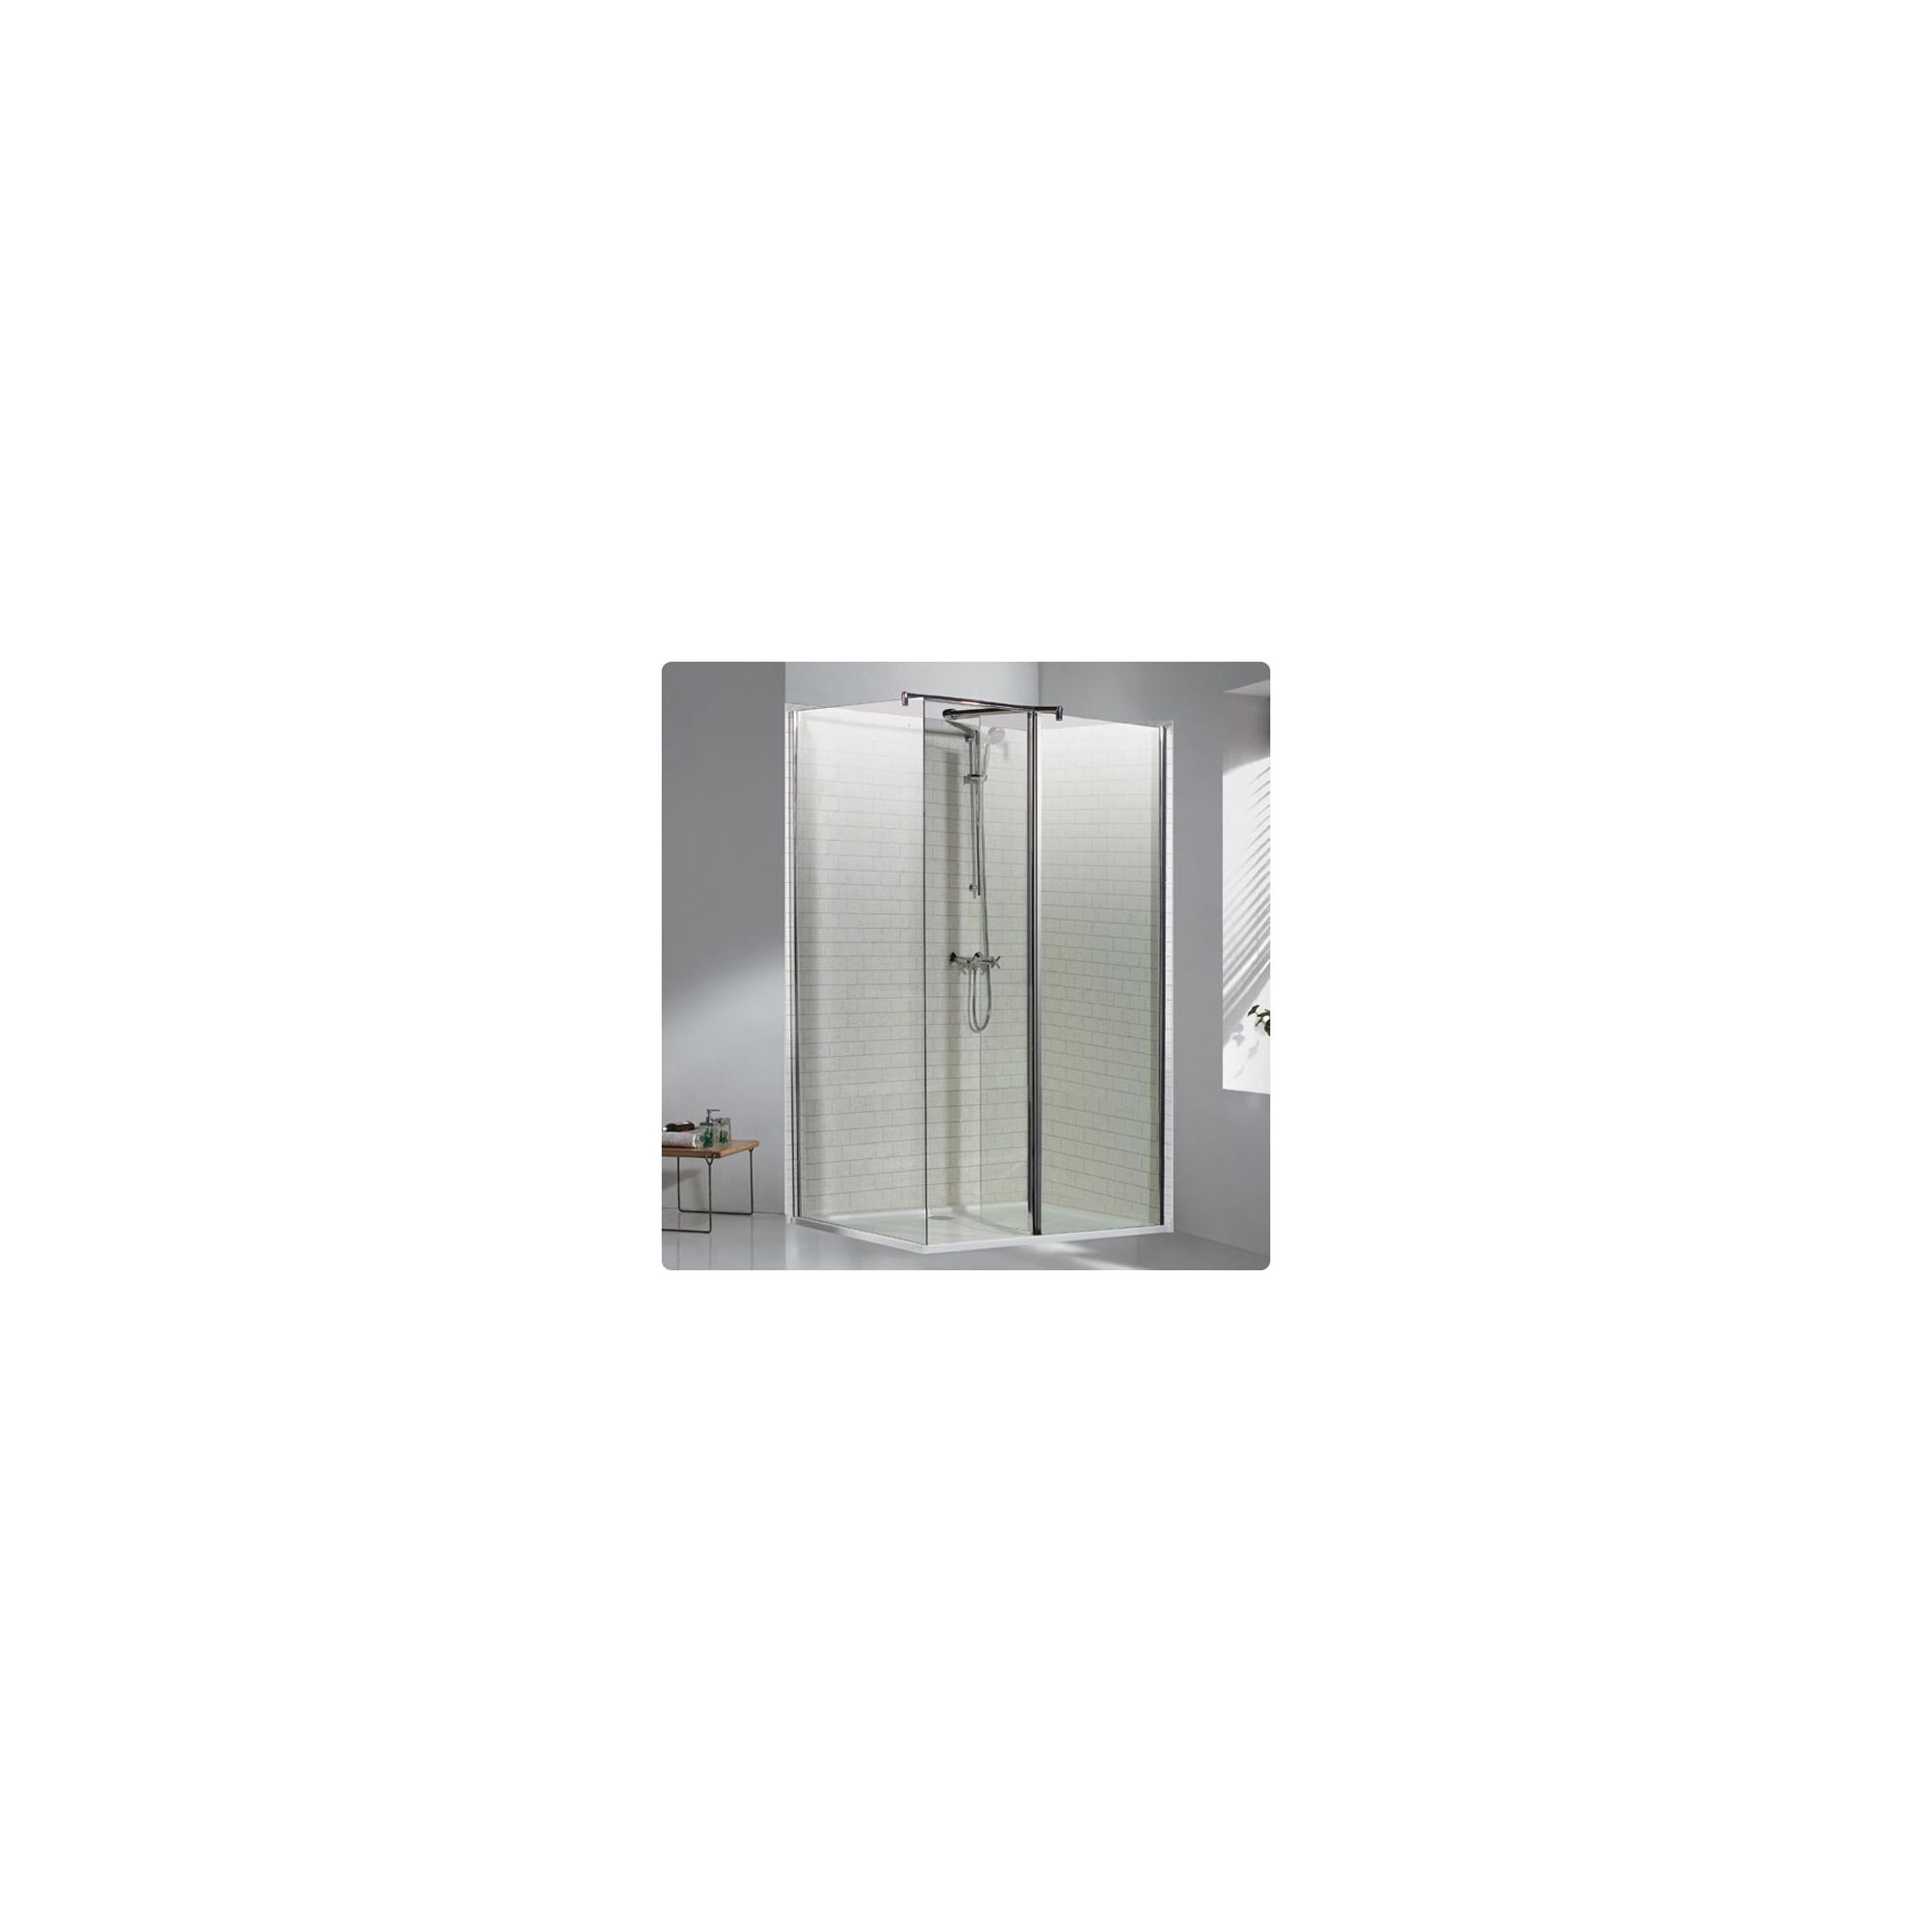 Duchy Choice Silver Walk-In Shower Enclosure 1700mm x 800mm (Complete with Tray), 6mm Glass at Tesco Direct